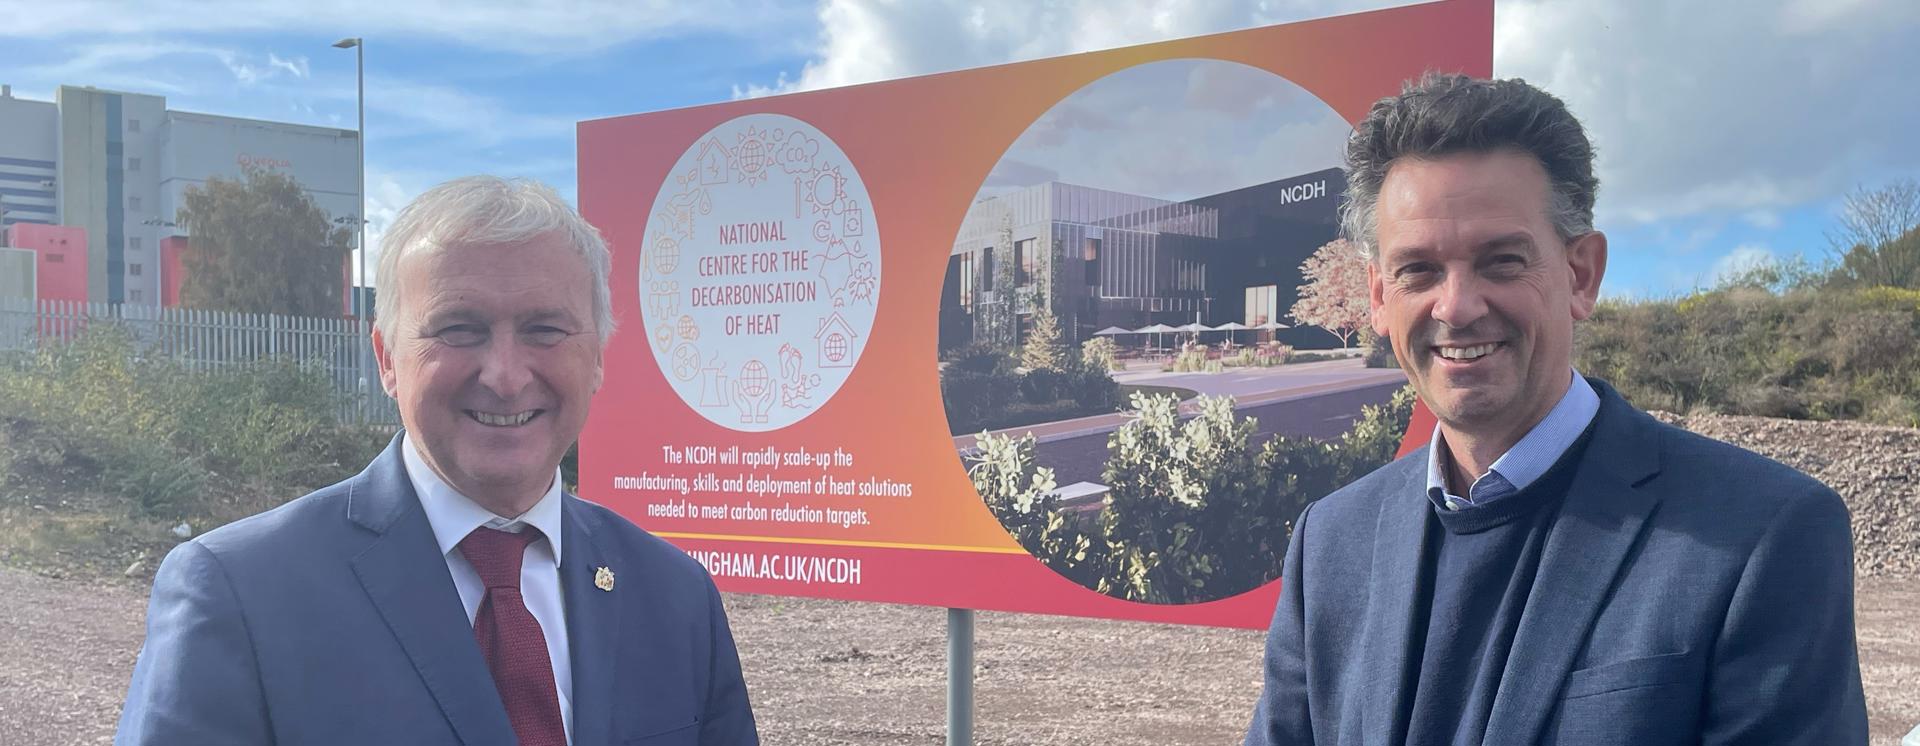 Birmingham City Council Leader, Councillor Ian Ward stands with Professor Martin Freer at the proposed site for the National Centre for the Decarbonisation of Heat